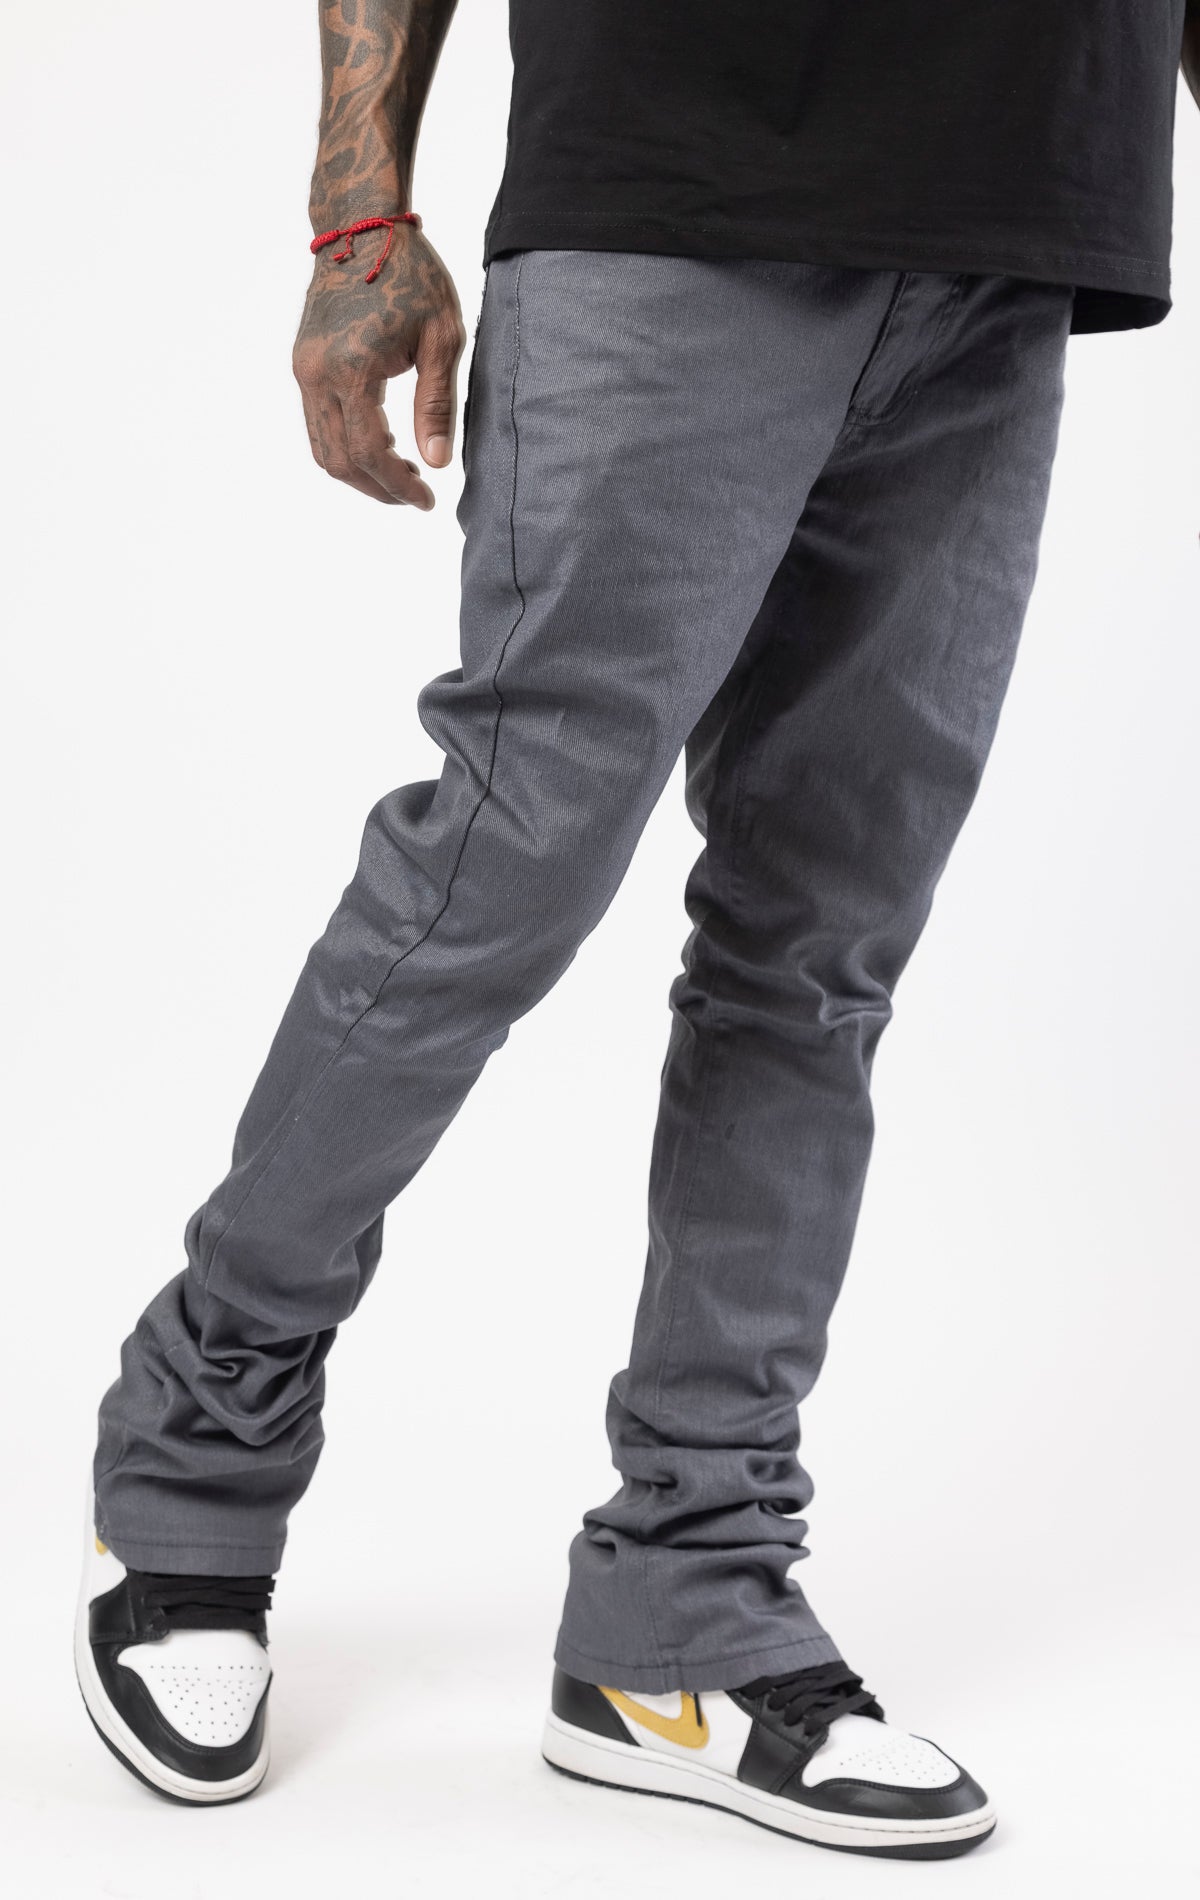 Grey Glossy denim with a regular rise, flared stacked jeans